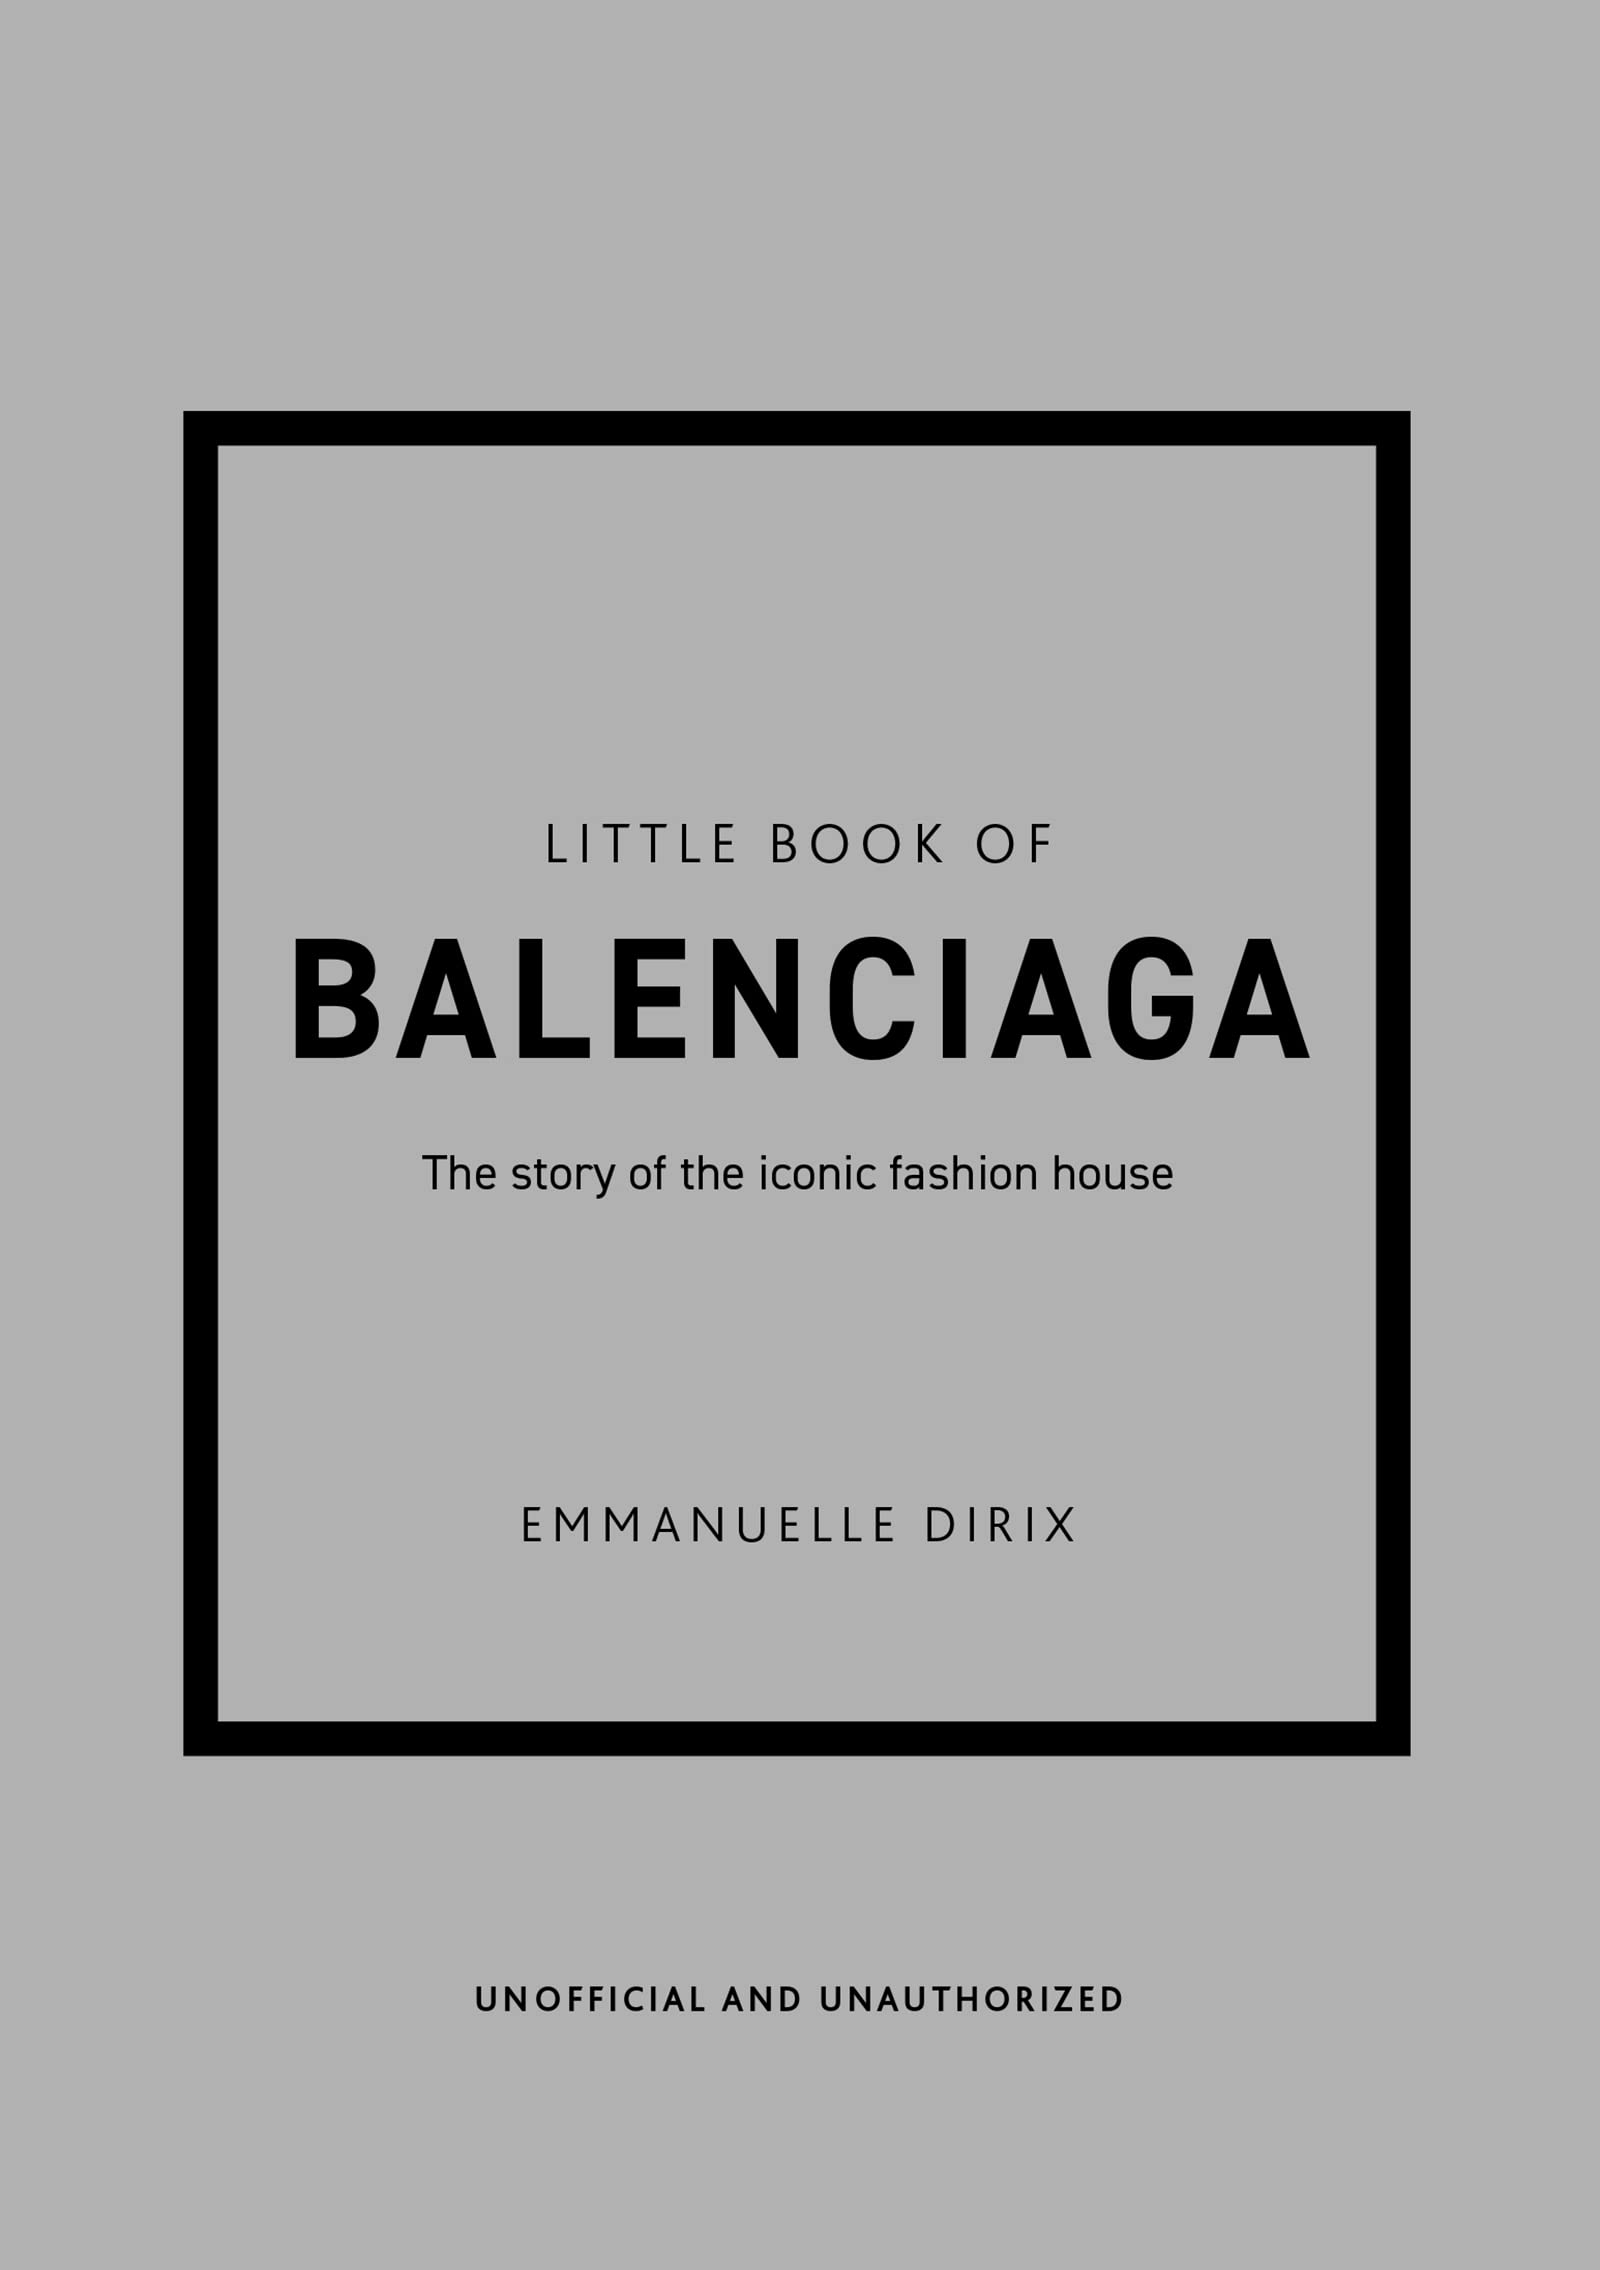 The Little Book of Balenciaga : The Story of the Iconic Fashion House (Hardcover)